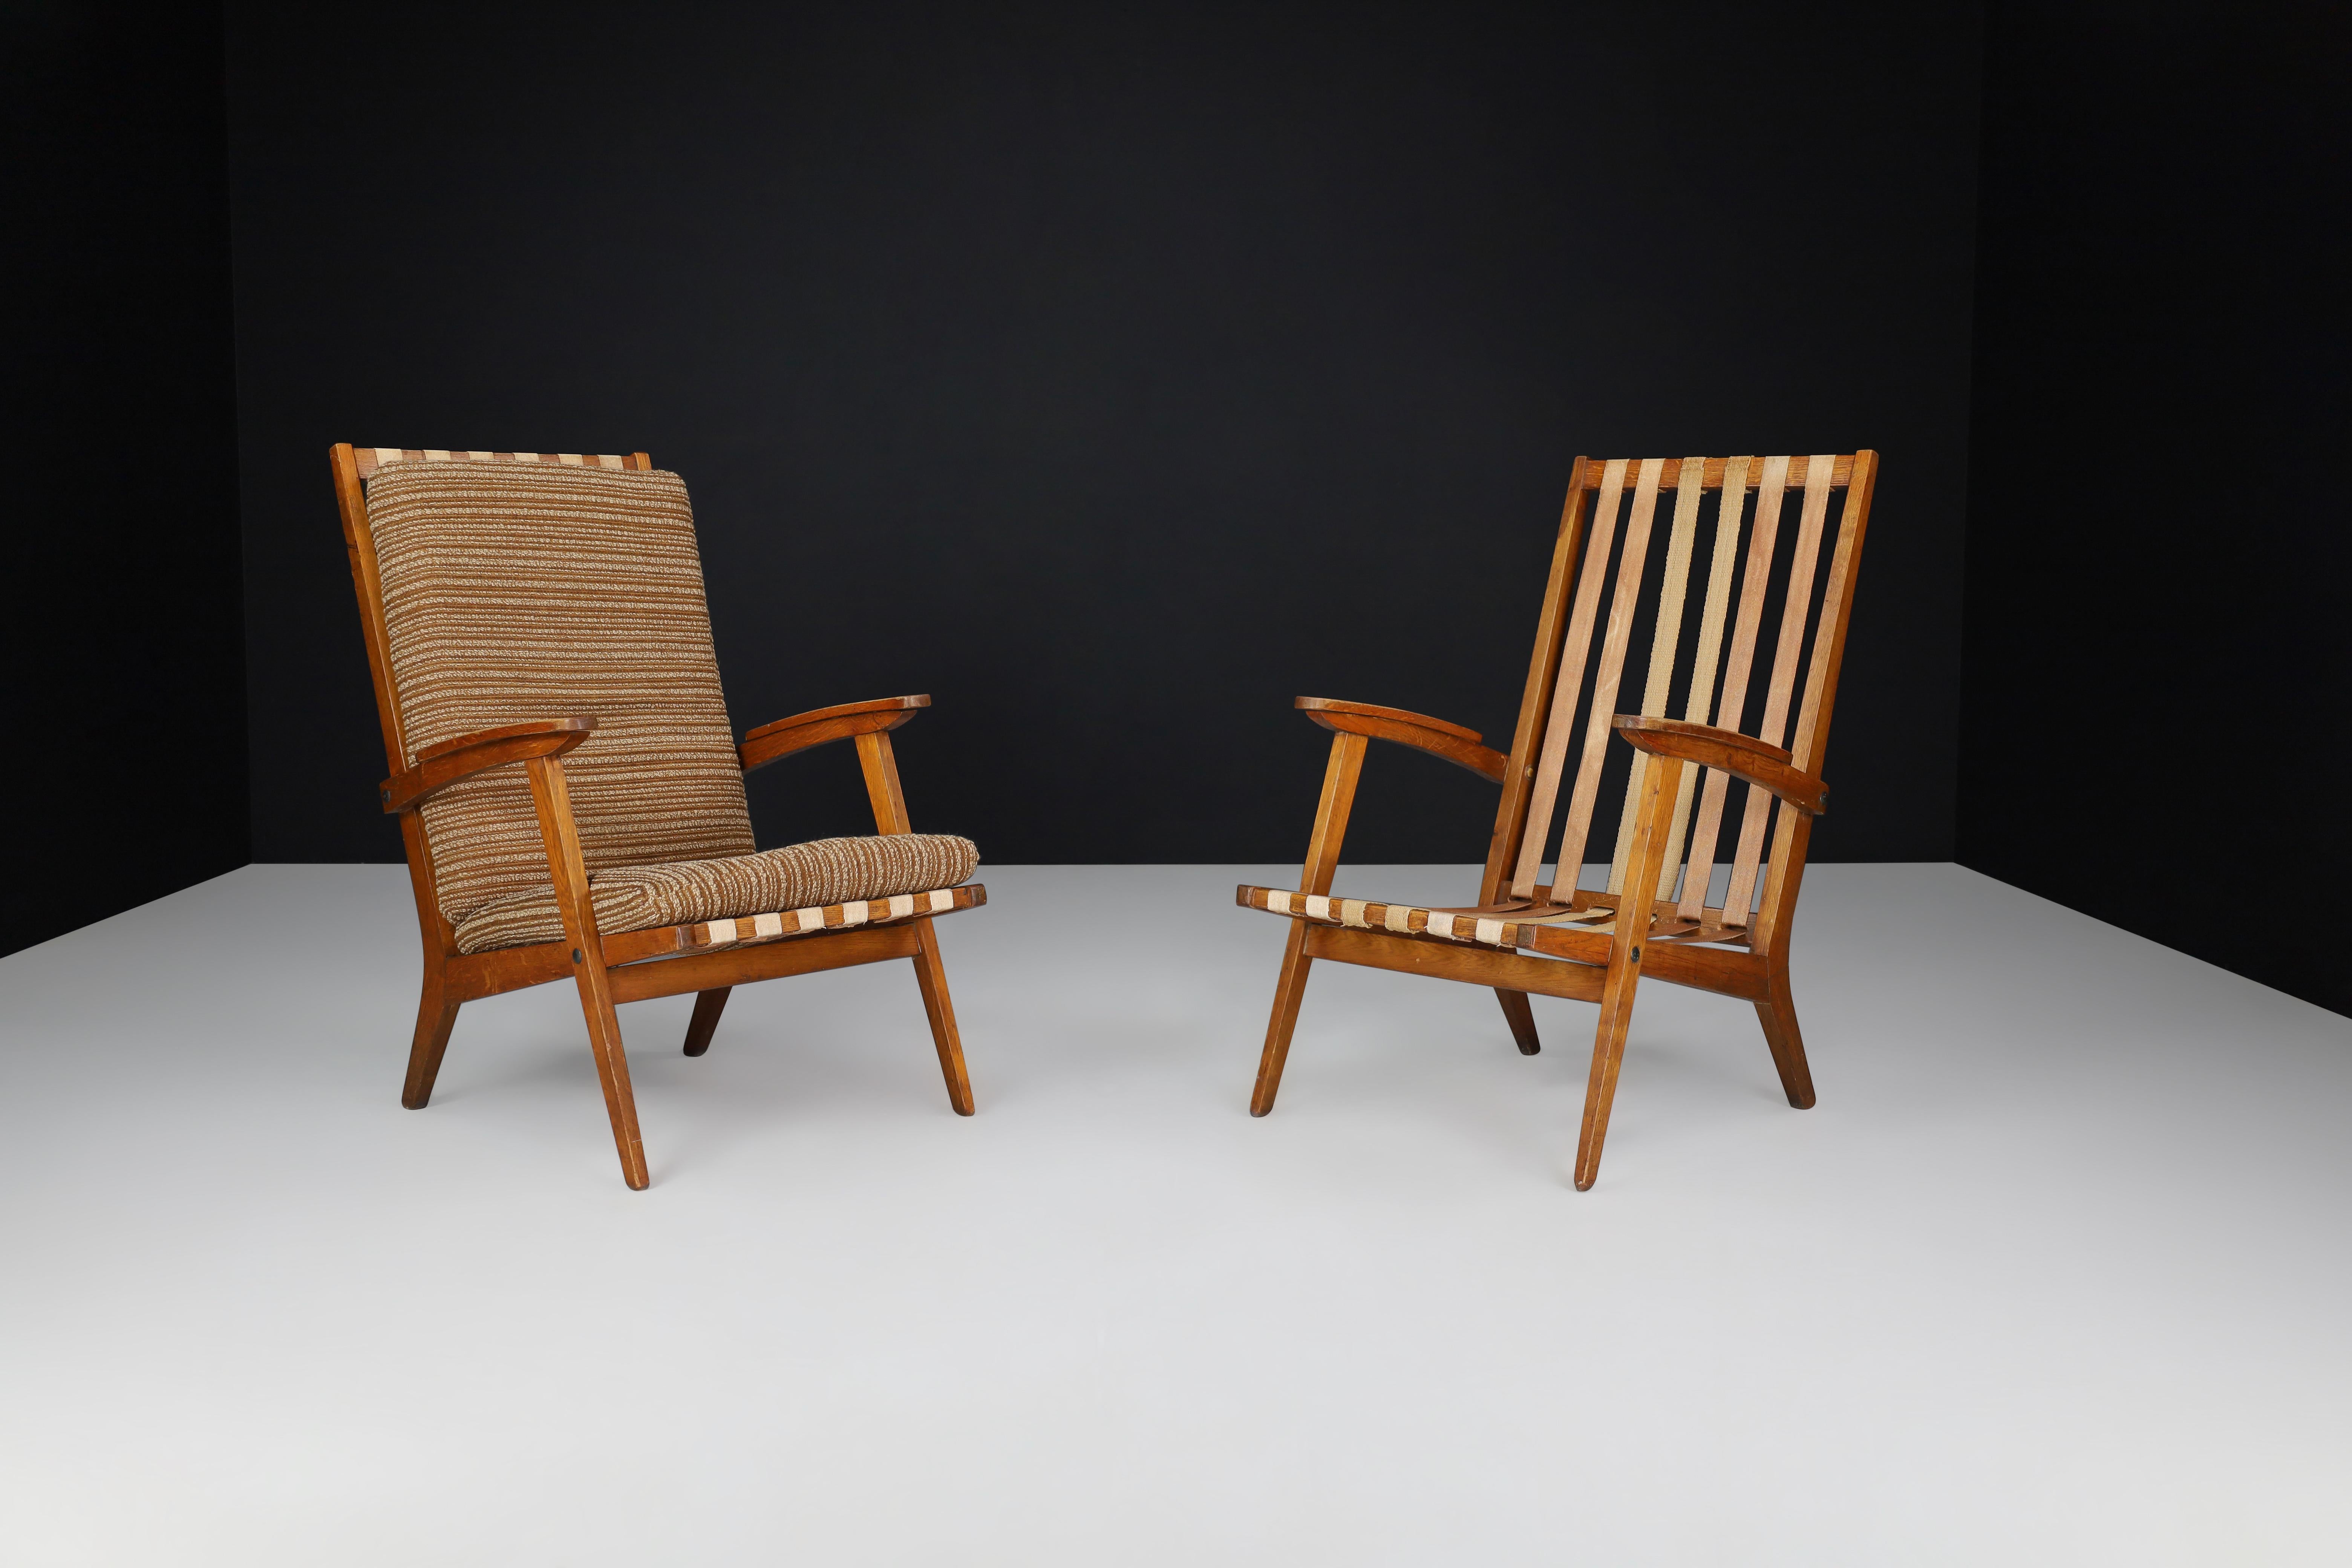 Oak Sculptural Lounge Chairs with Brown Upholstery, France 1950s. 

midcentury oak lounge chairs manufactured and designed in France 1950s. These elegant chairs have the original upholstery fabric and a lovely French oak frame. It is in excellent